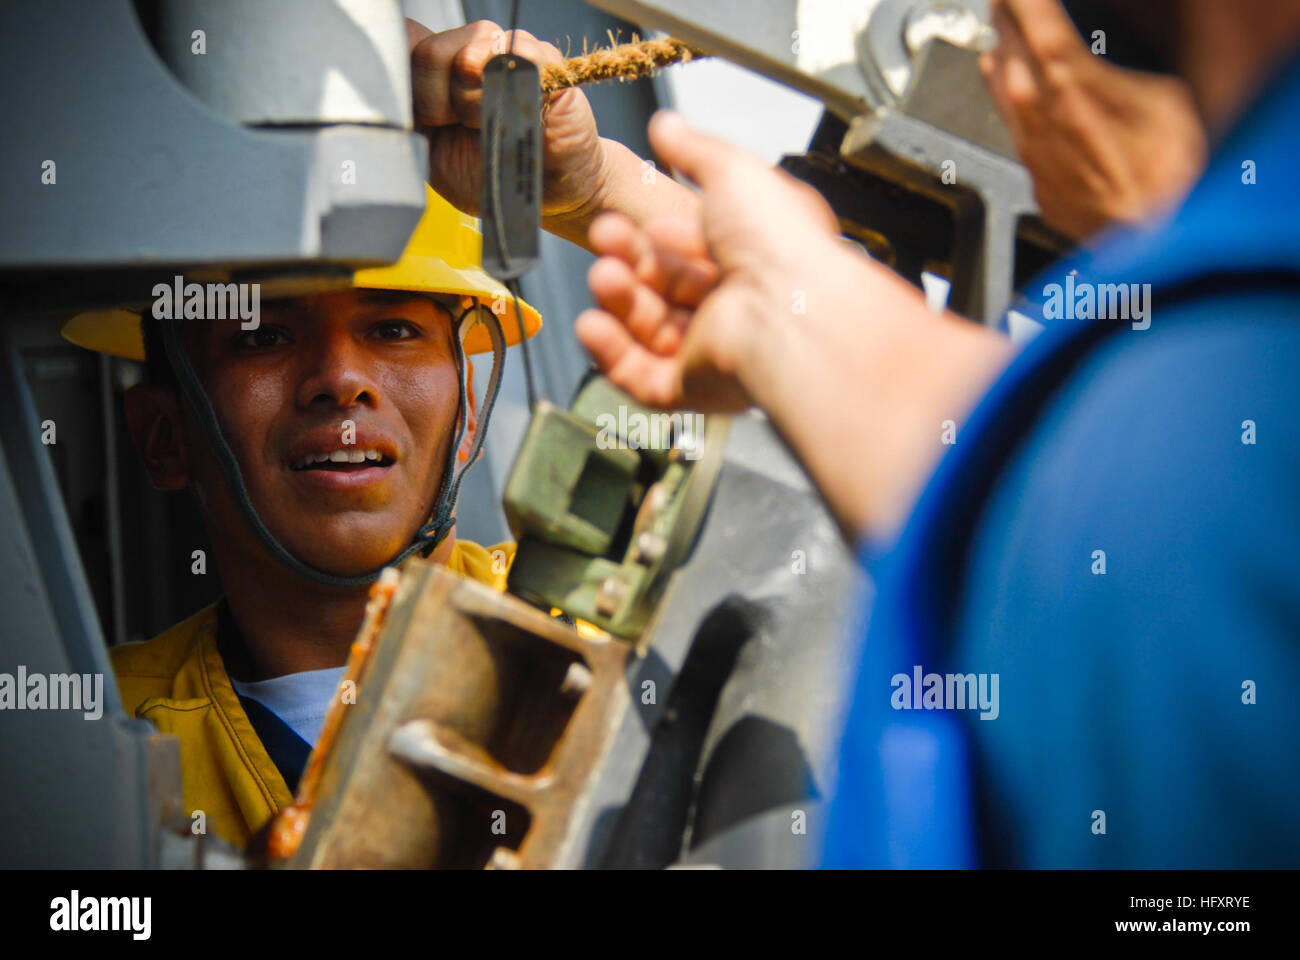 090919-N-8590G-011 CARIBBEAN SEA (Sept. 19, 2009) Boatswains Mate 2nd Class Enrique Aparicio mans the underway replenishment station aboard the amphibious transport dock ship USS Mesa Verde (LPD 19) during a replenishment at sea (RAS) with the Dutch navy fast combat support ship HNLMS Amsterdam (A386). Mesa Verde is participating in the multinational training exercise Fuerzas Aliadas PANAMAX 2009. PANAMAX is a multinational exercise involving more than 4,500 personnel from 20 participating countries tailored to the defense of the Panama Canal. (U.S. Navy photo by Mass Communication Specialist  Stock Photo